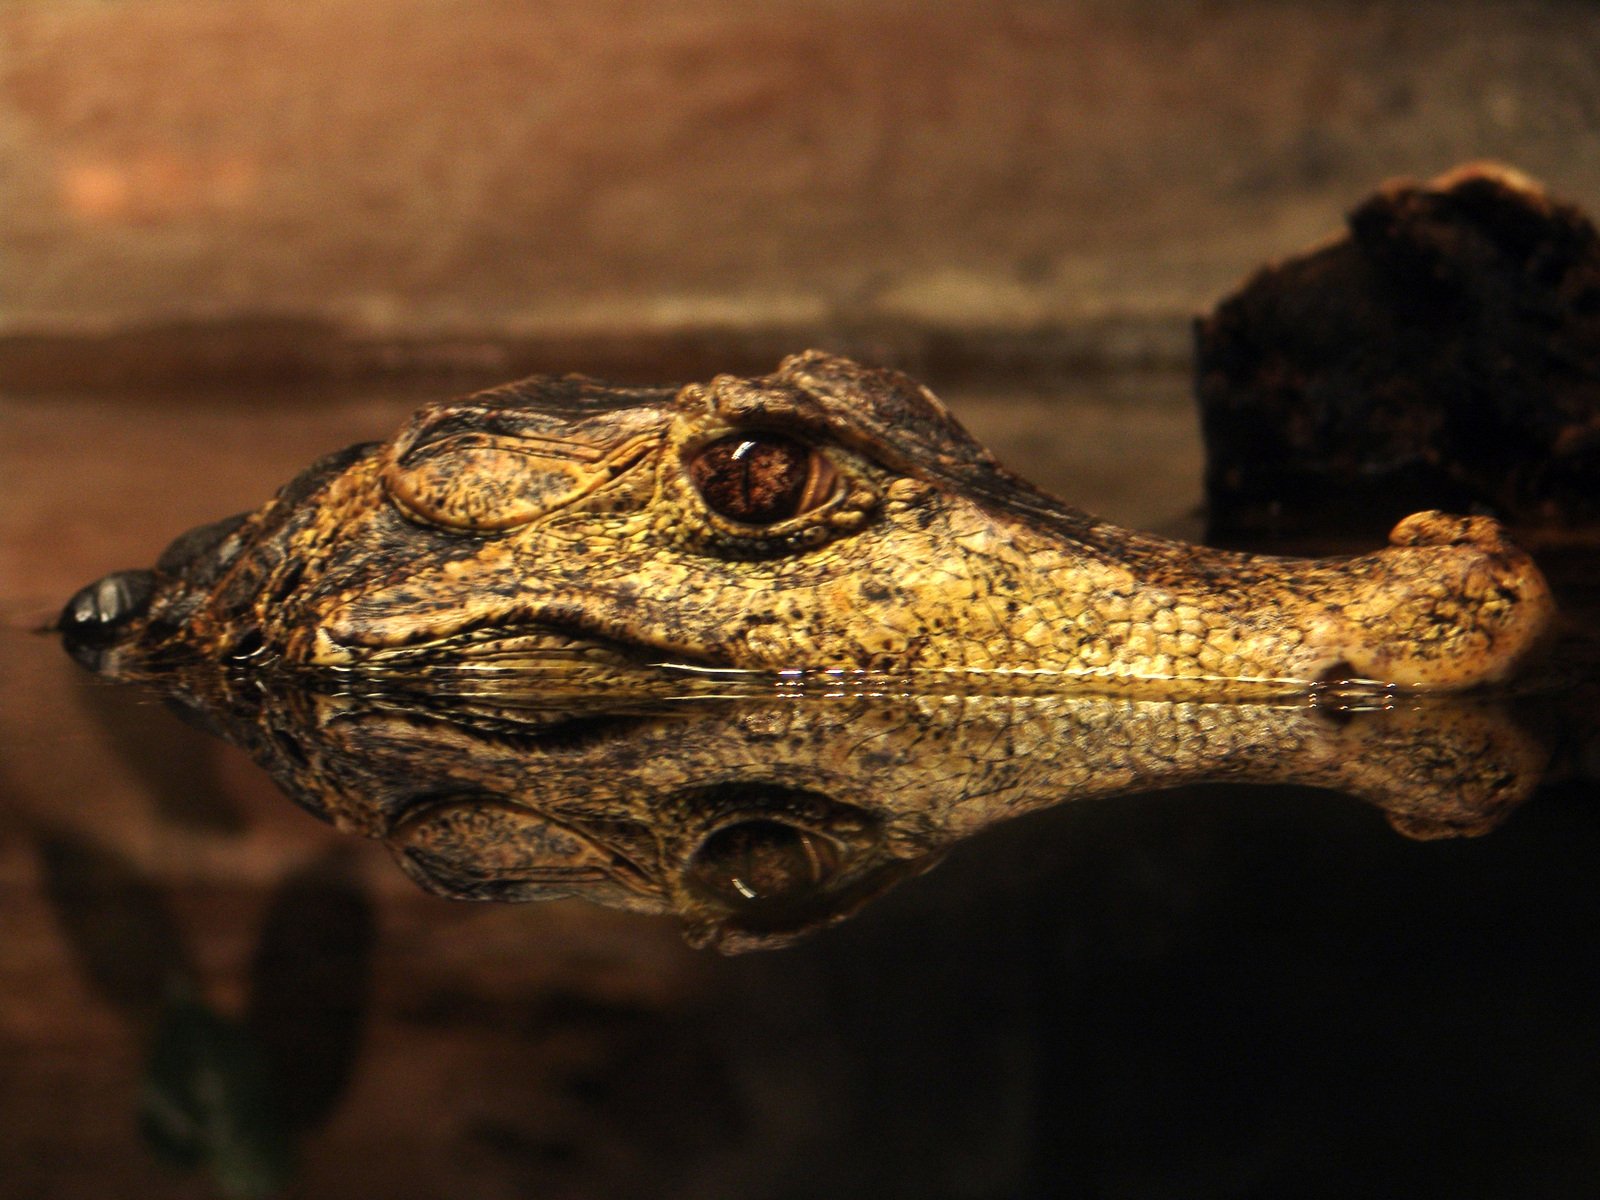 a alligator's head reflected in the water